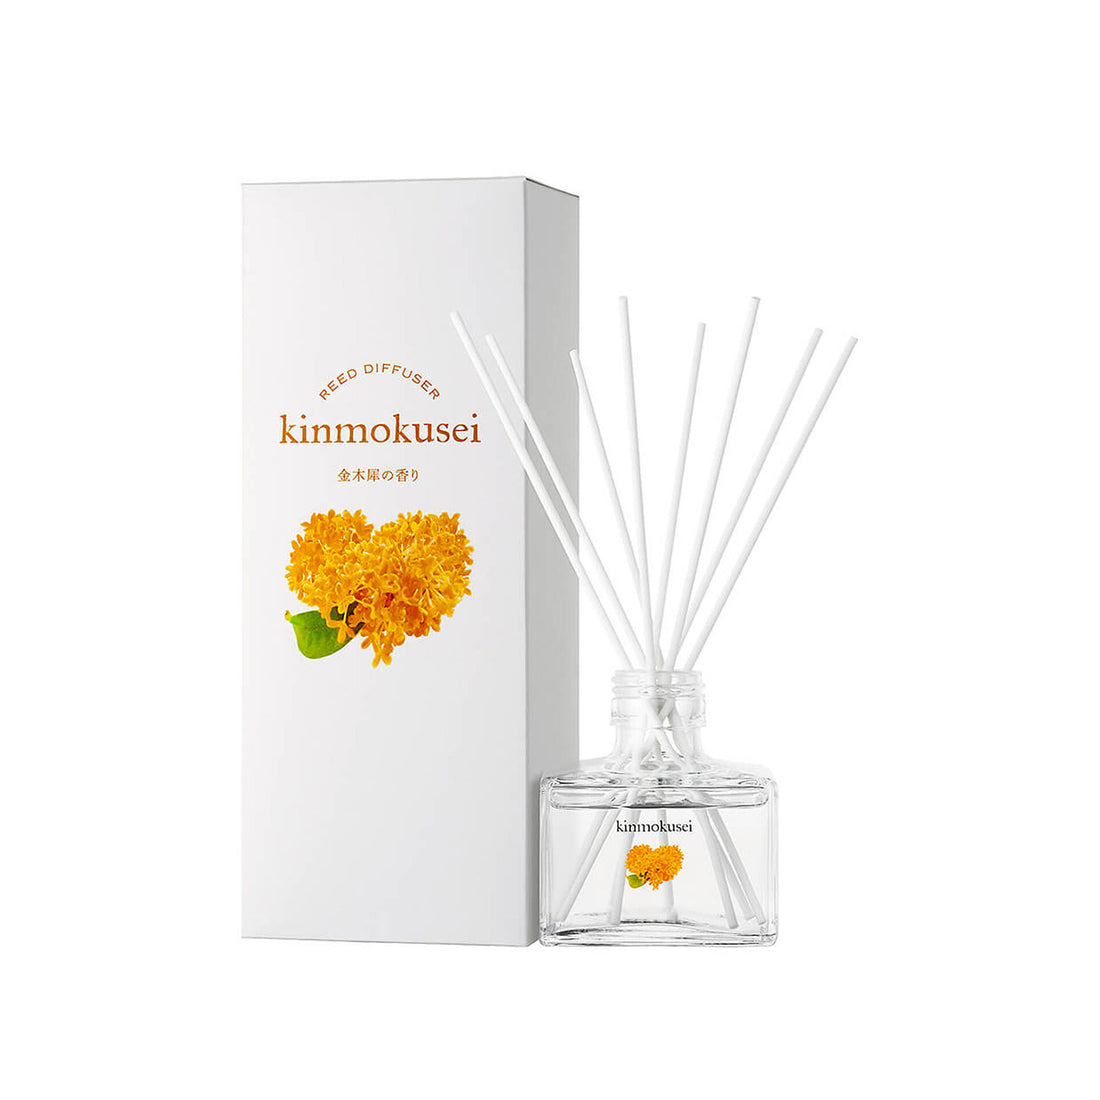 Daily Aroma Japan Osmanthus Reed Diffuser 120ml